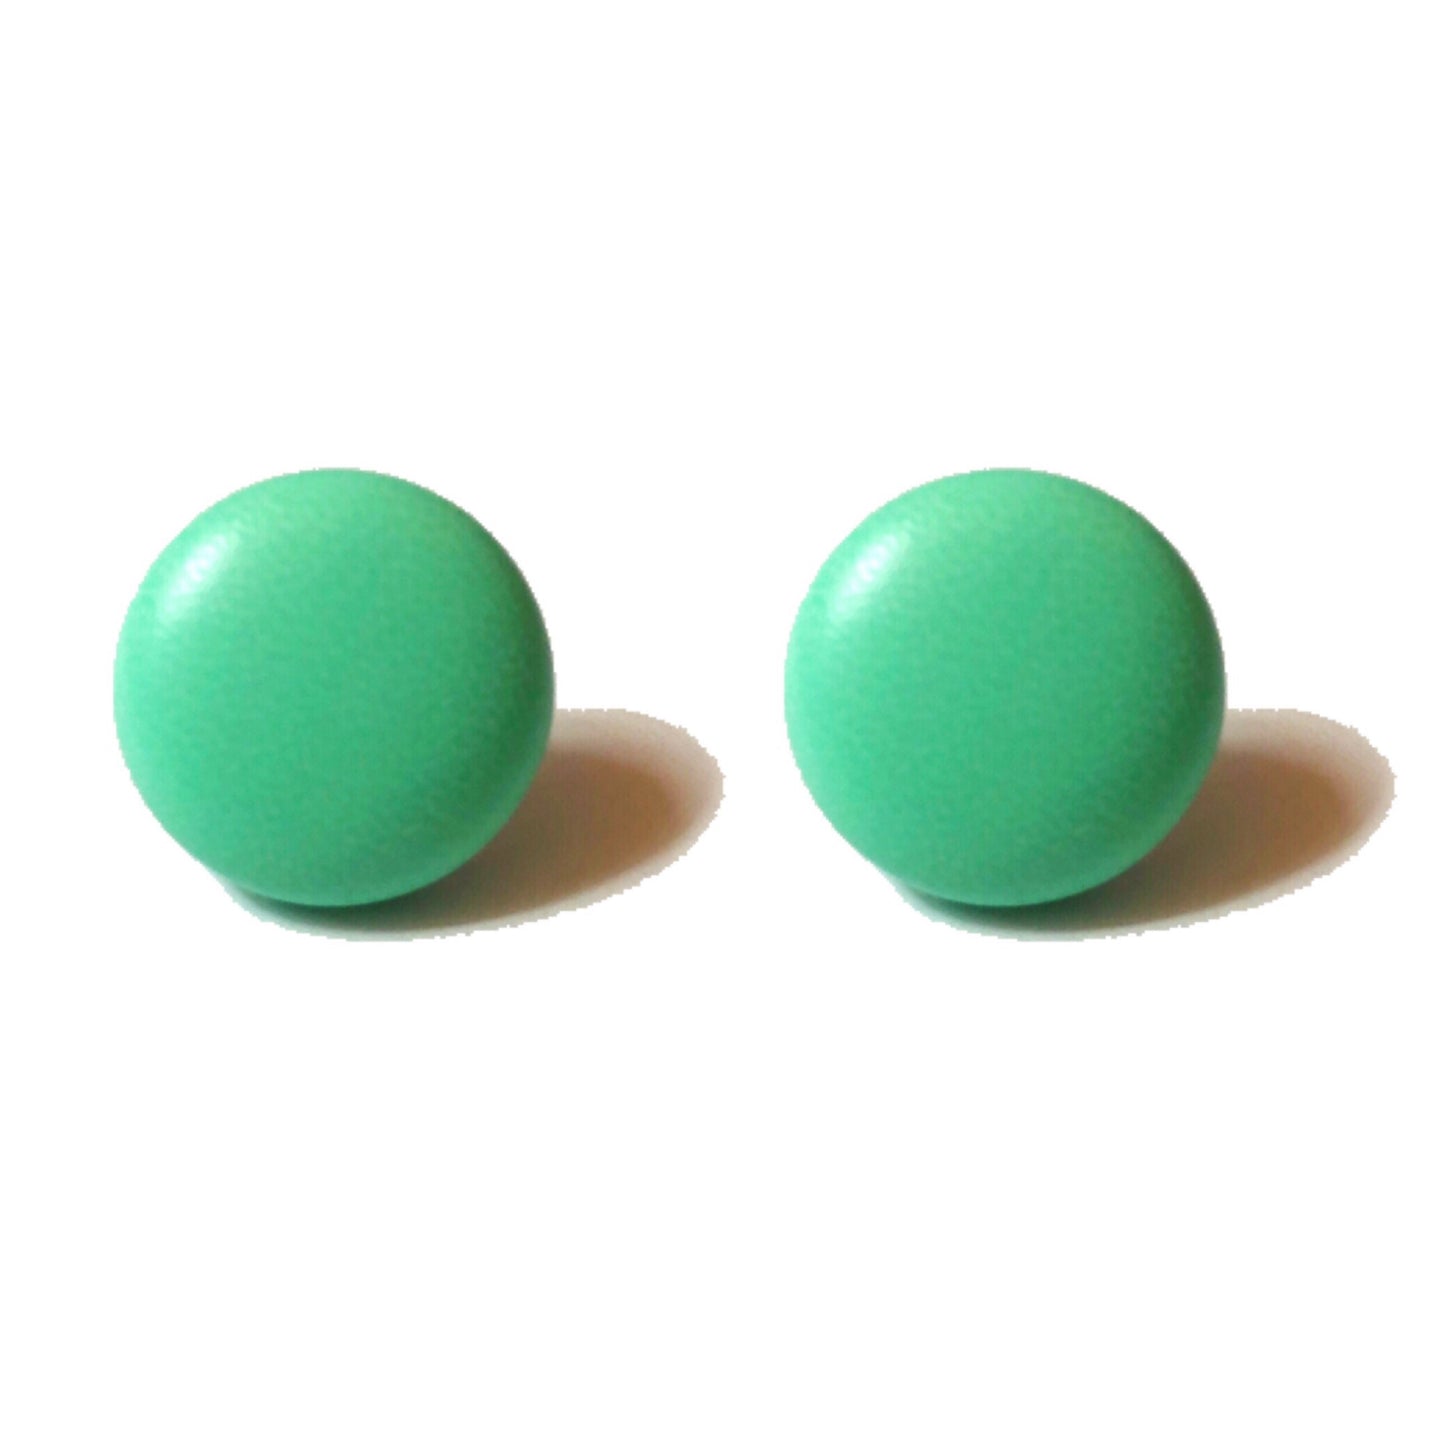 Solid Mint Fabric Button Earrings